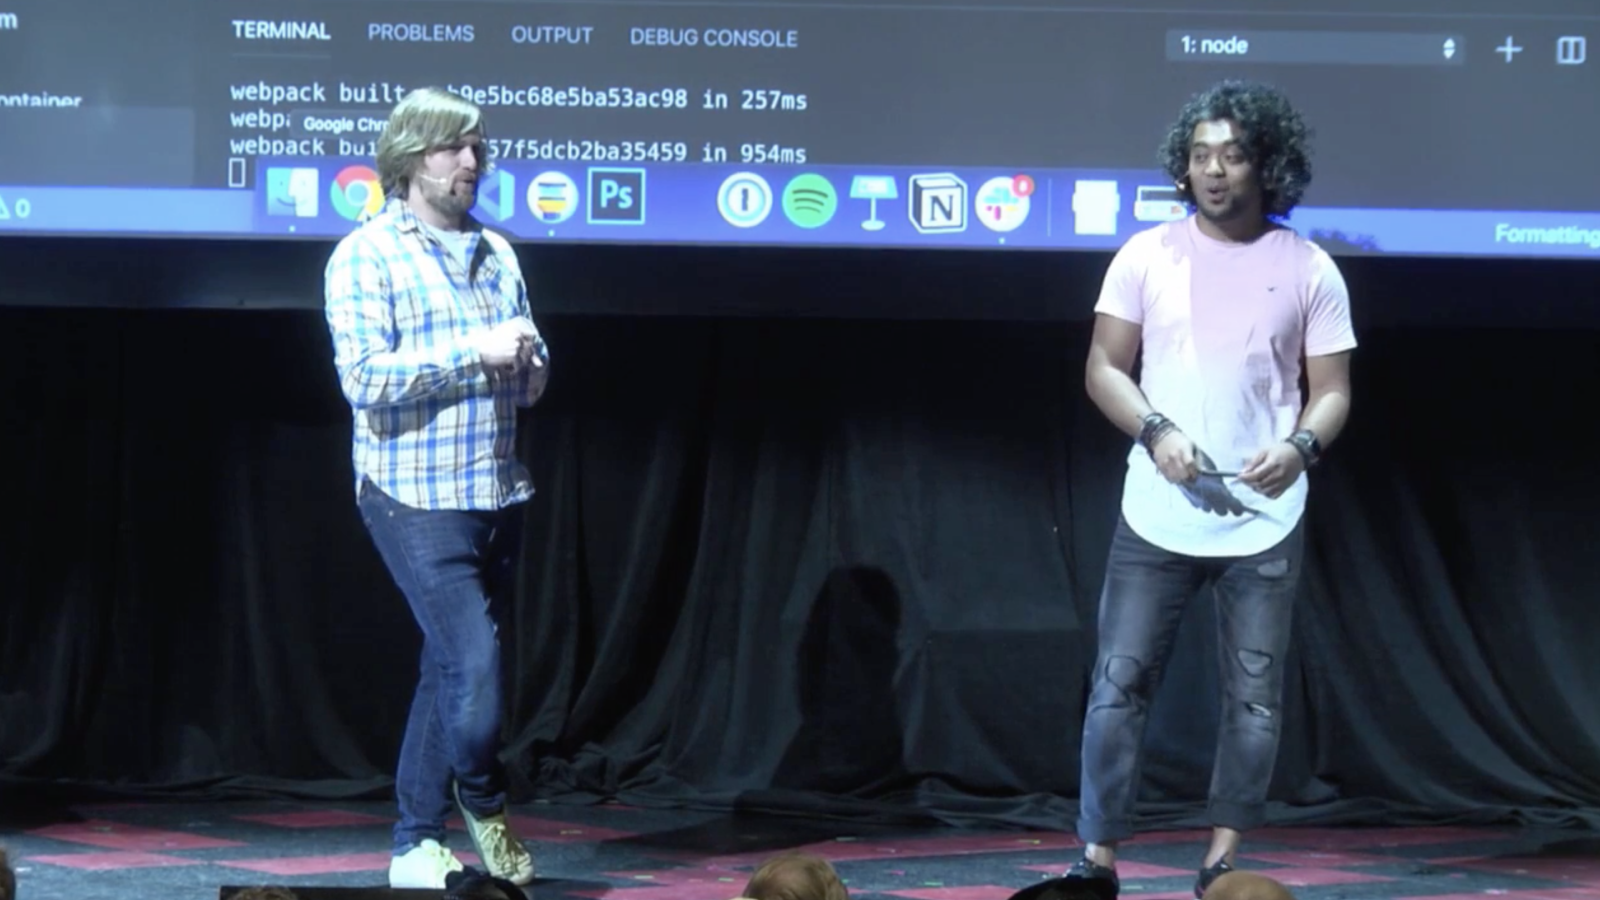 Designer Dan Mall and developer Brad Frost on stage together at Smashing Conference NYC 2019